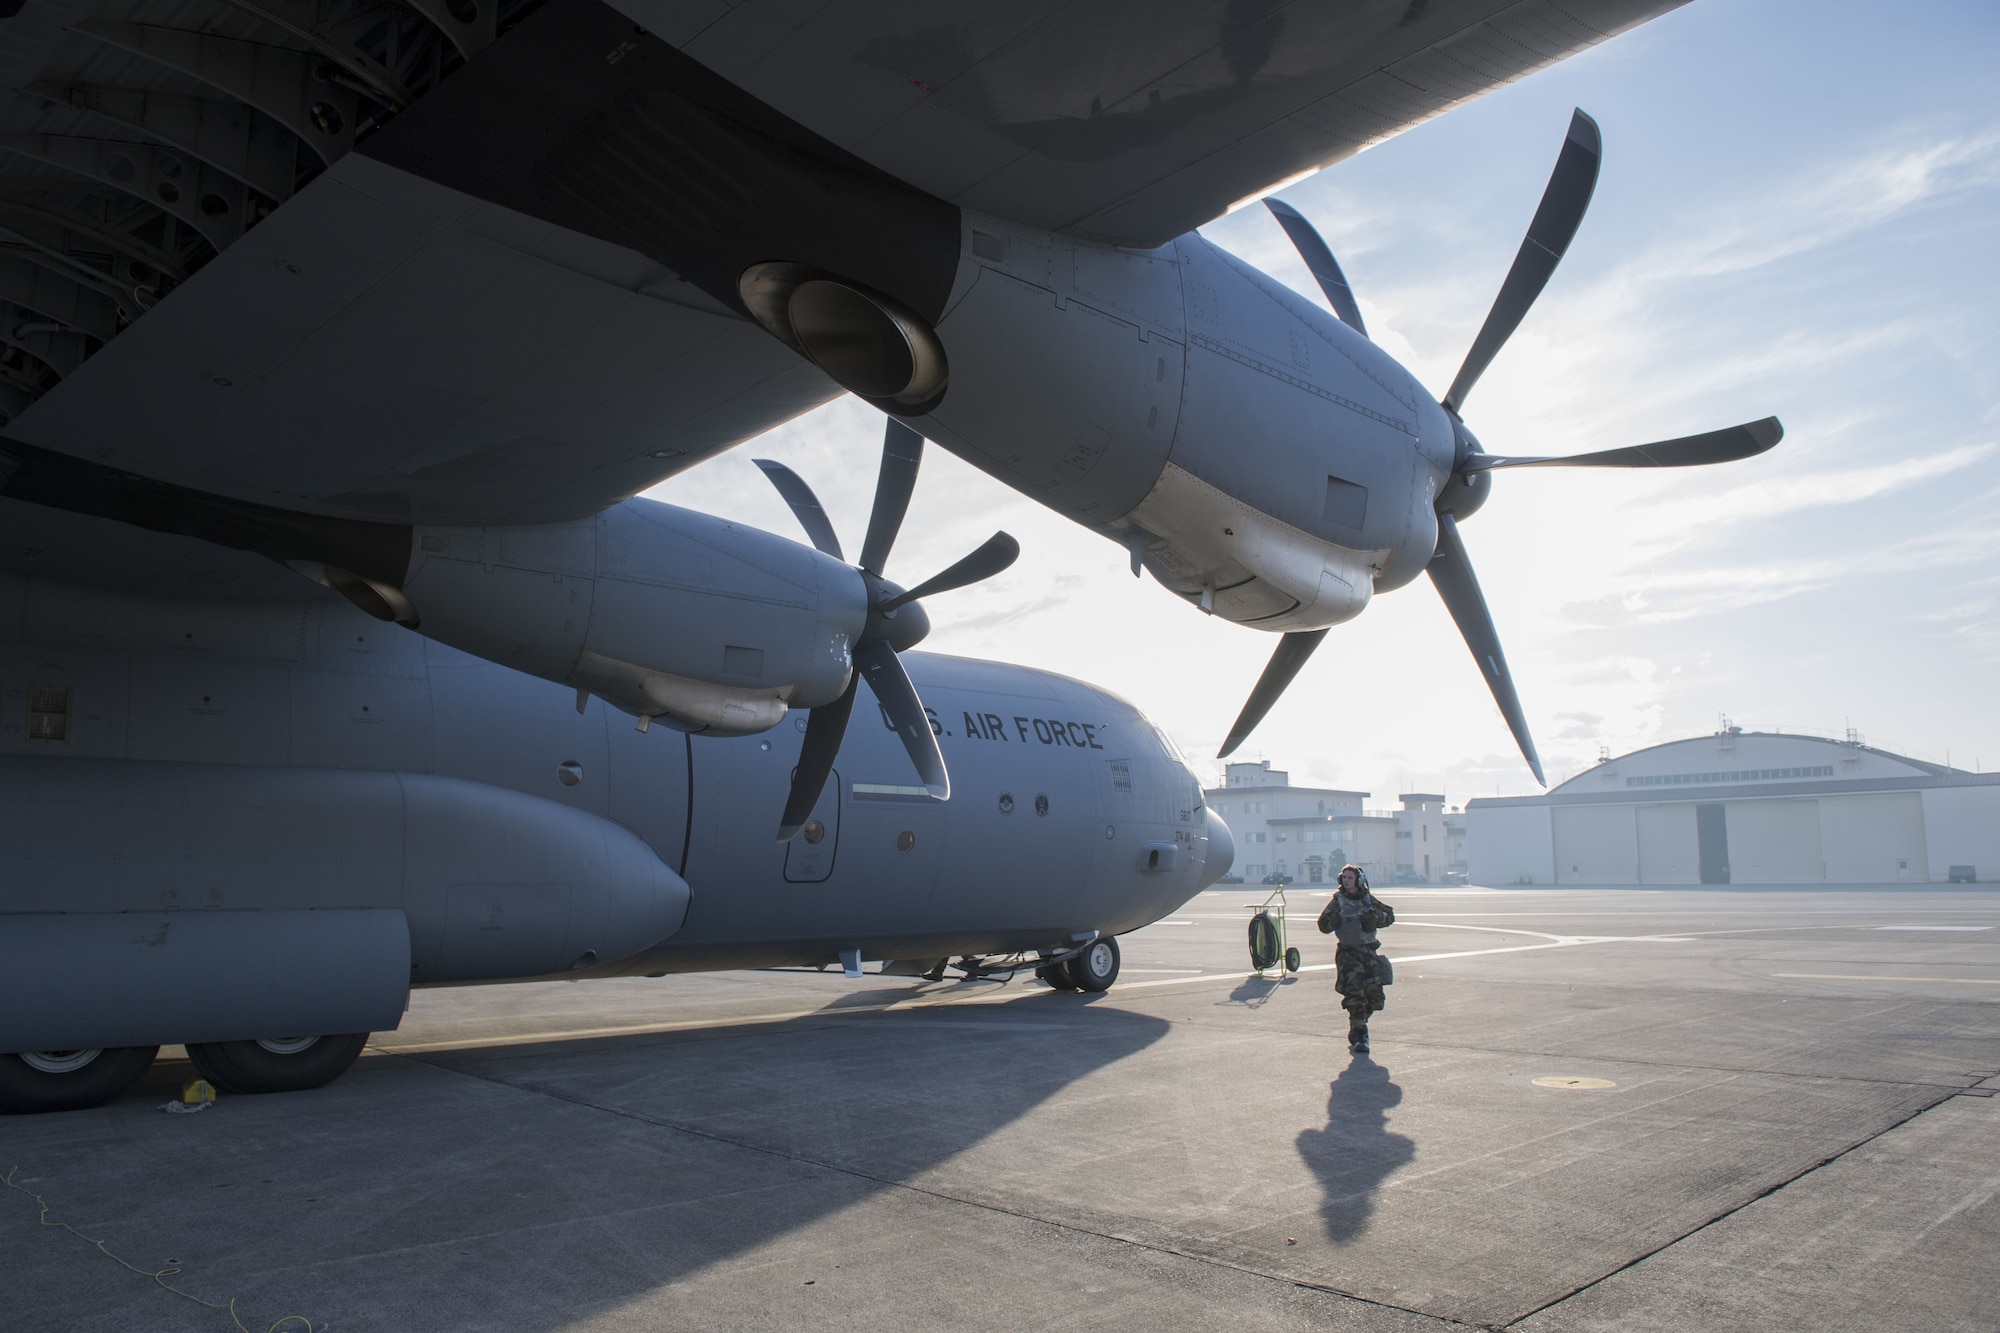 An Airman with the 374th Aircraft Maintenance Squadron performs pre-flight checks prior to starting up a C-130J Super Hercules during exercise Vigilant Ace 18, Dec. 6, 2017, at Yokota Air Base, Japan.